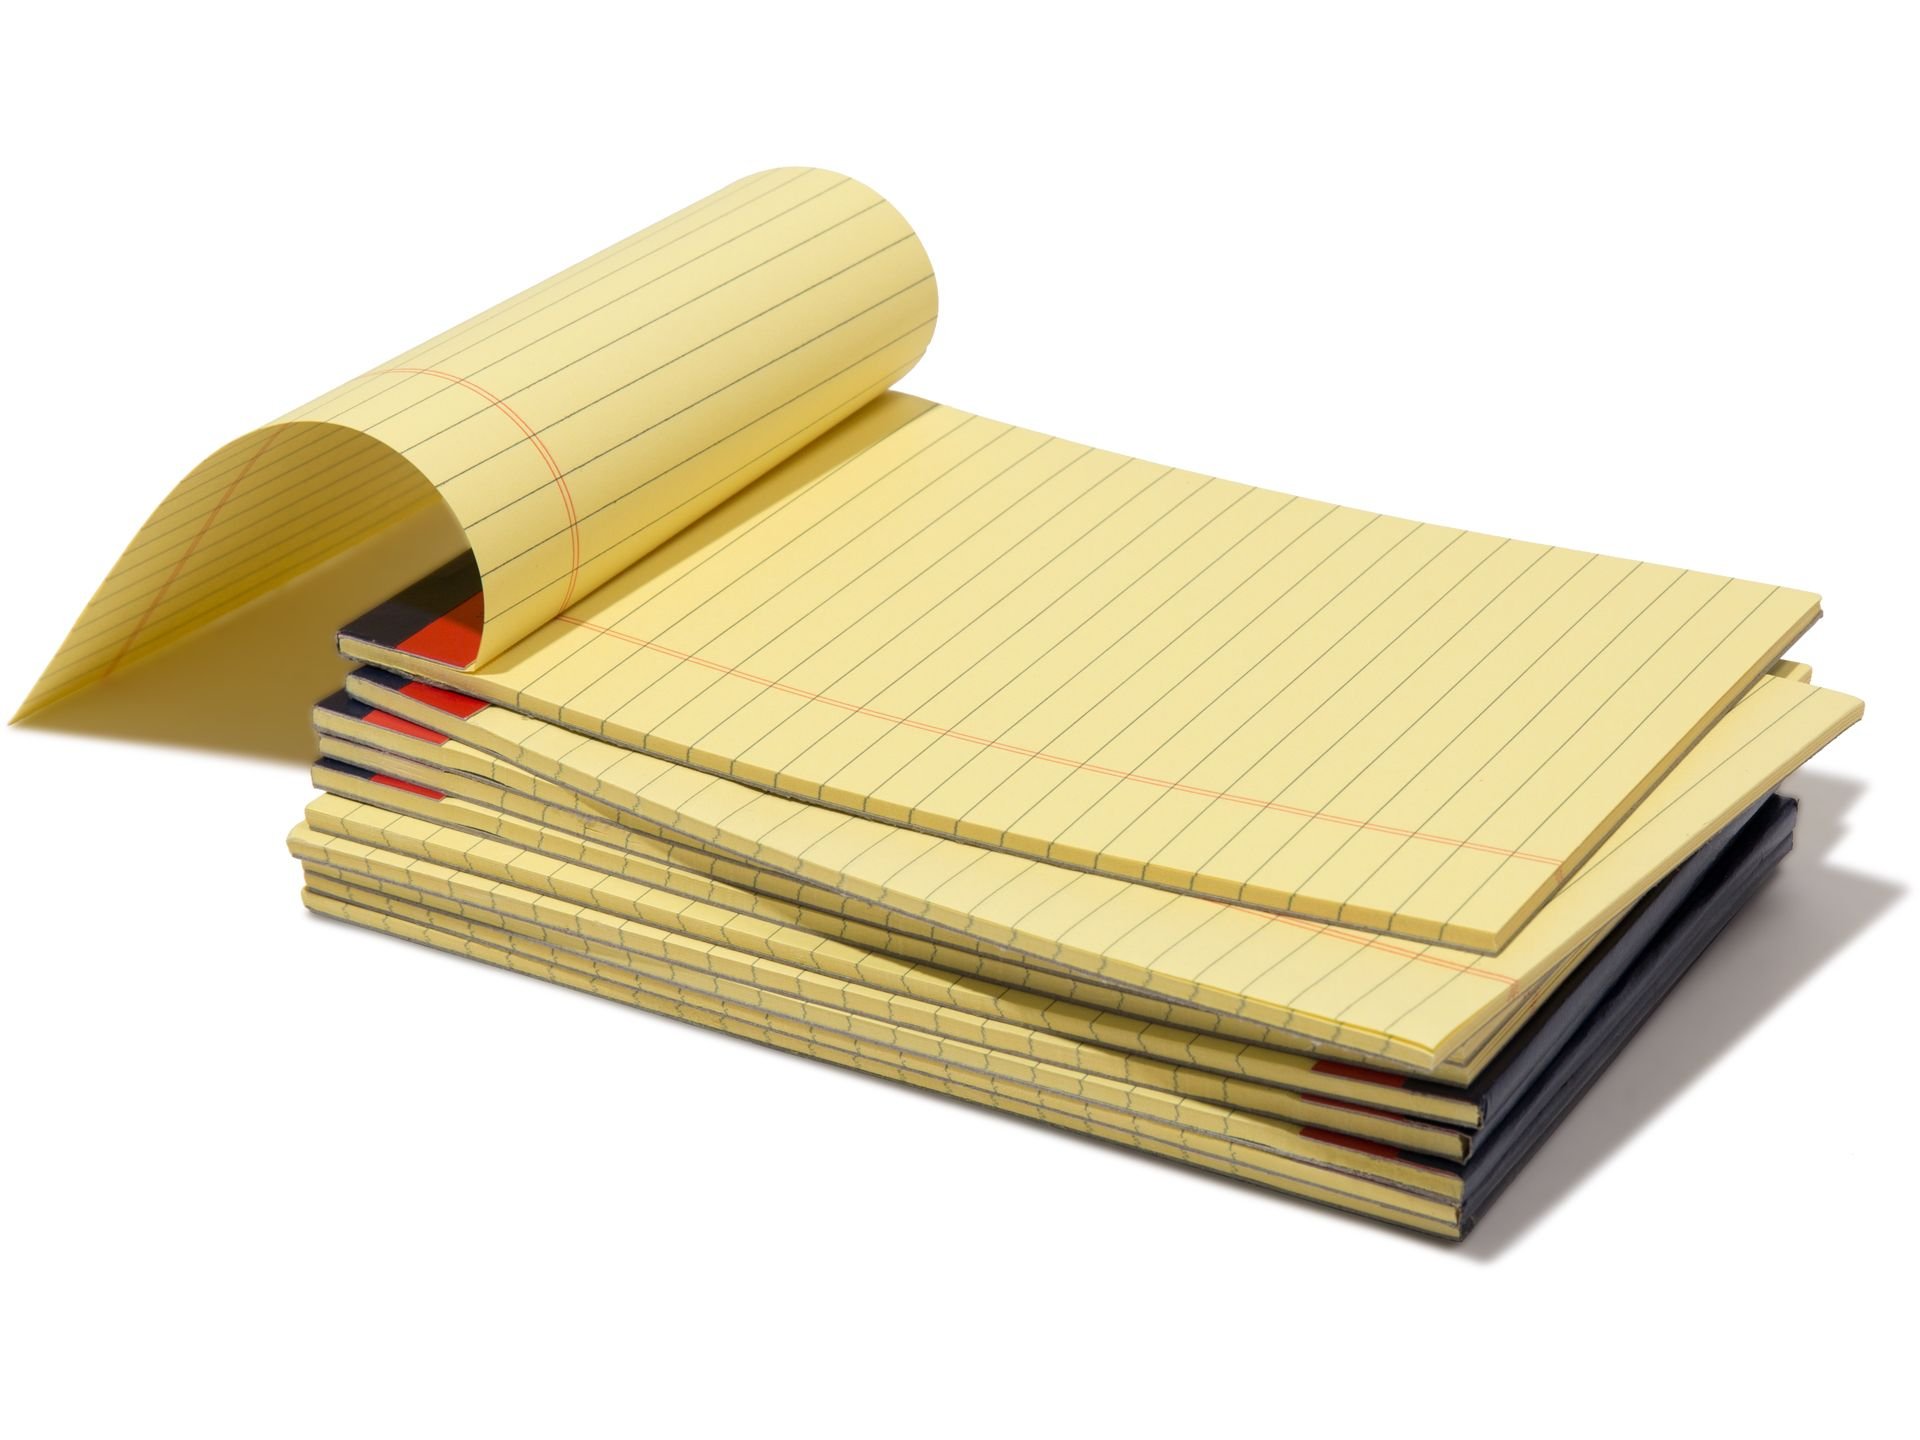 Buy Yellow Legal Pad Notepad online at Modulor